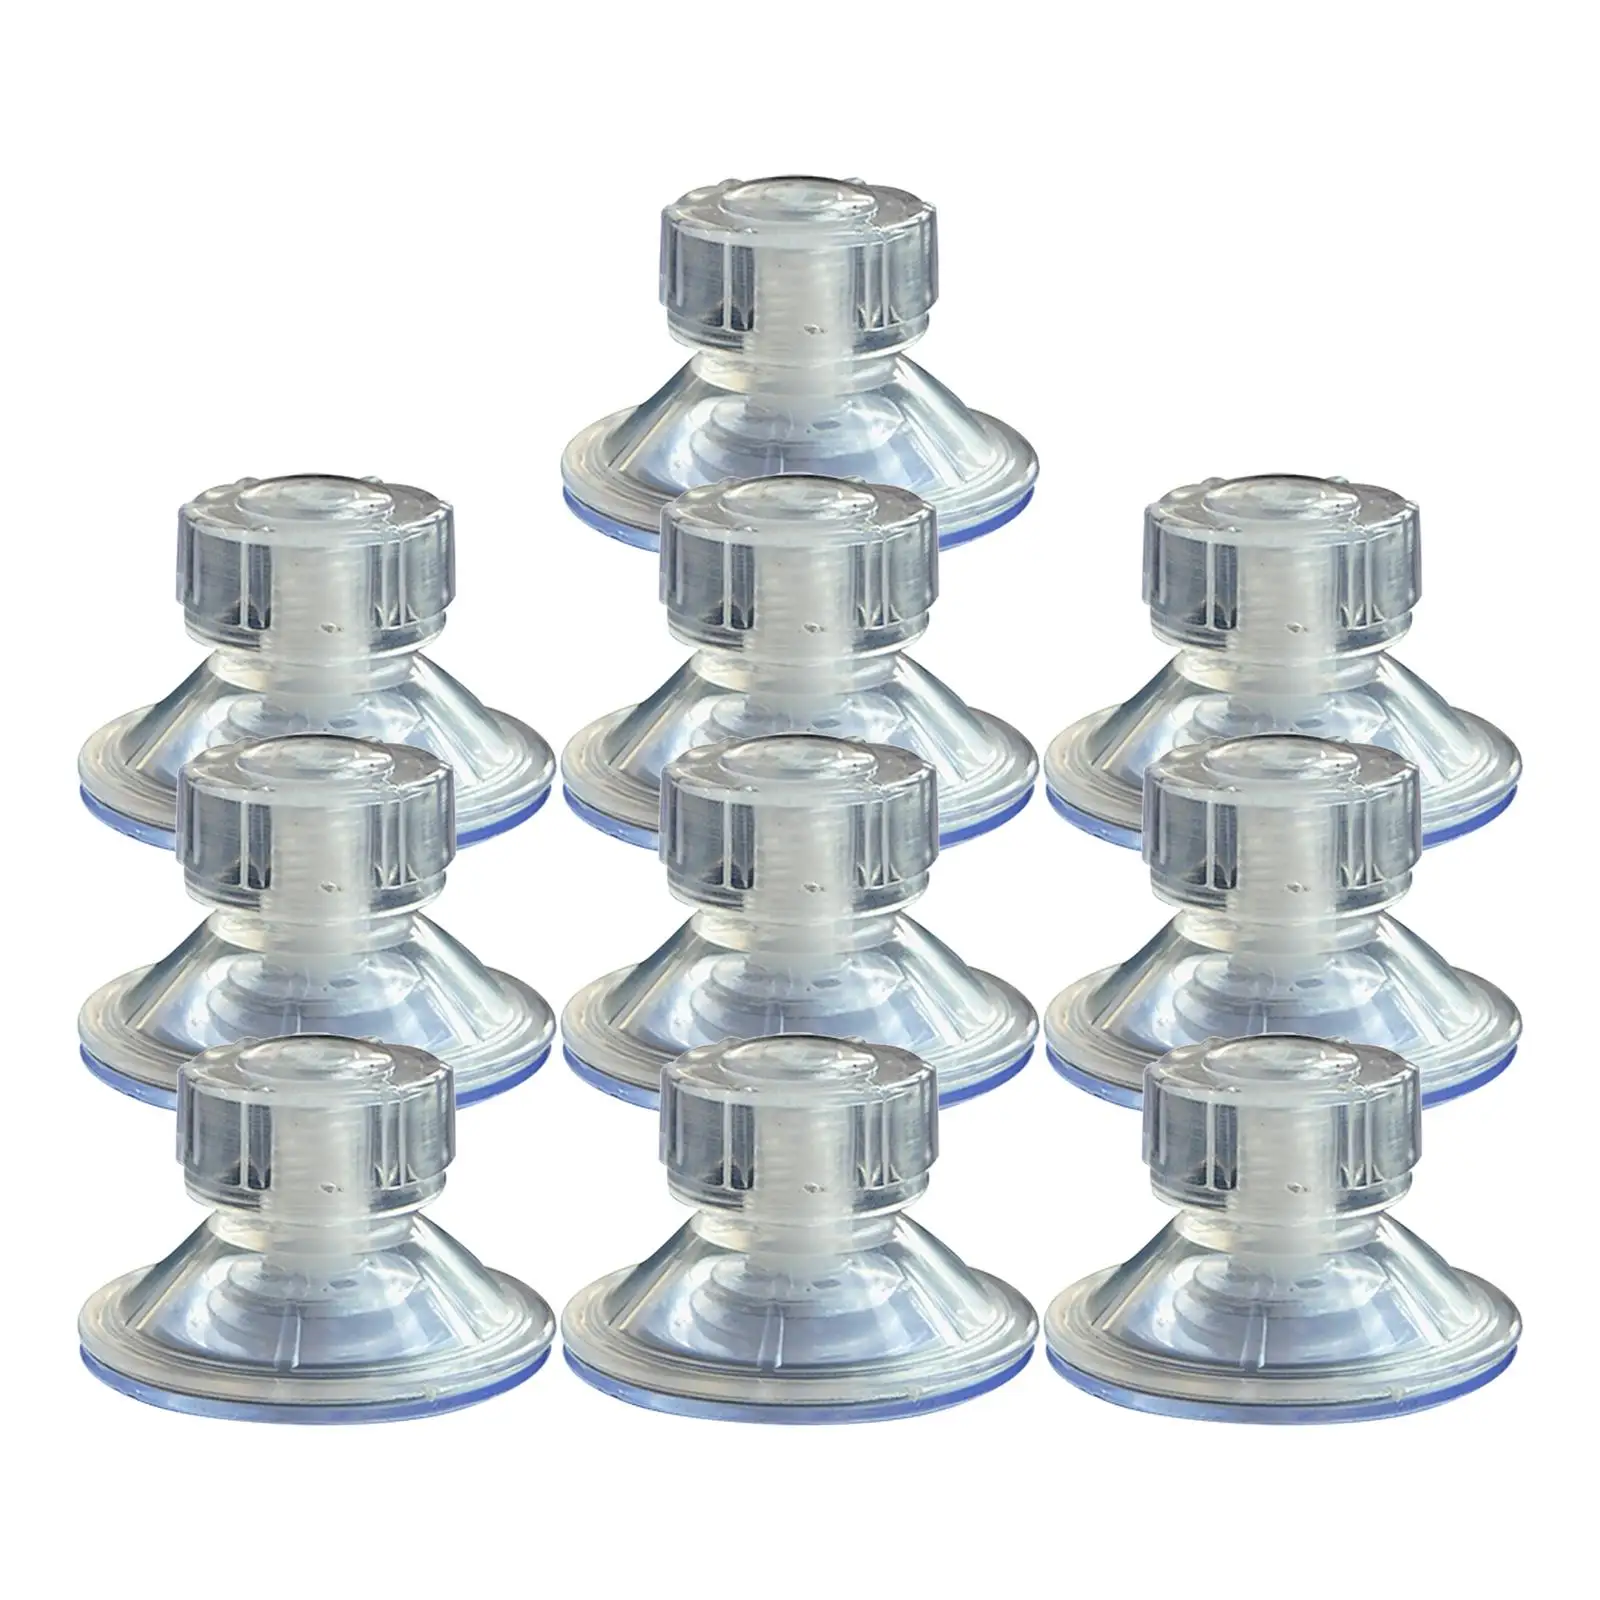 10 Pieces Car Awning Suction Cup Anchor Limpets Holder for  Motorhome